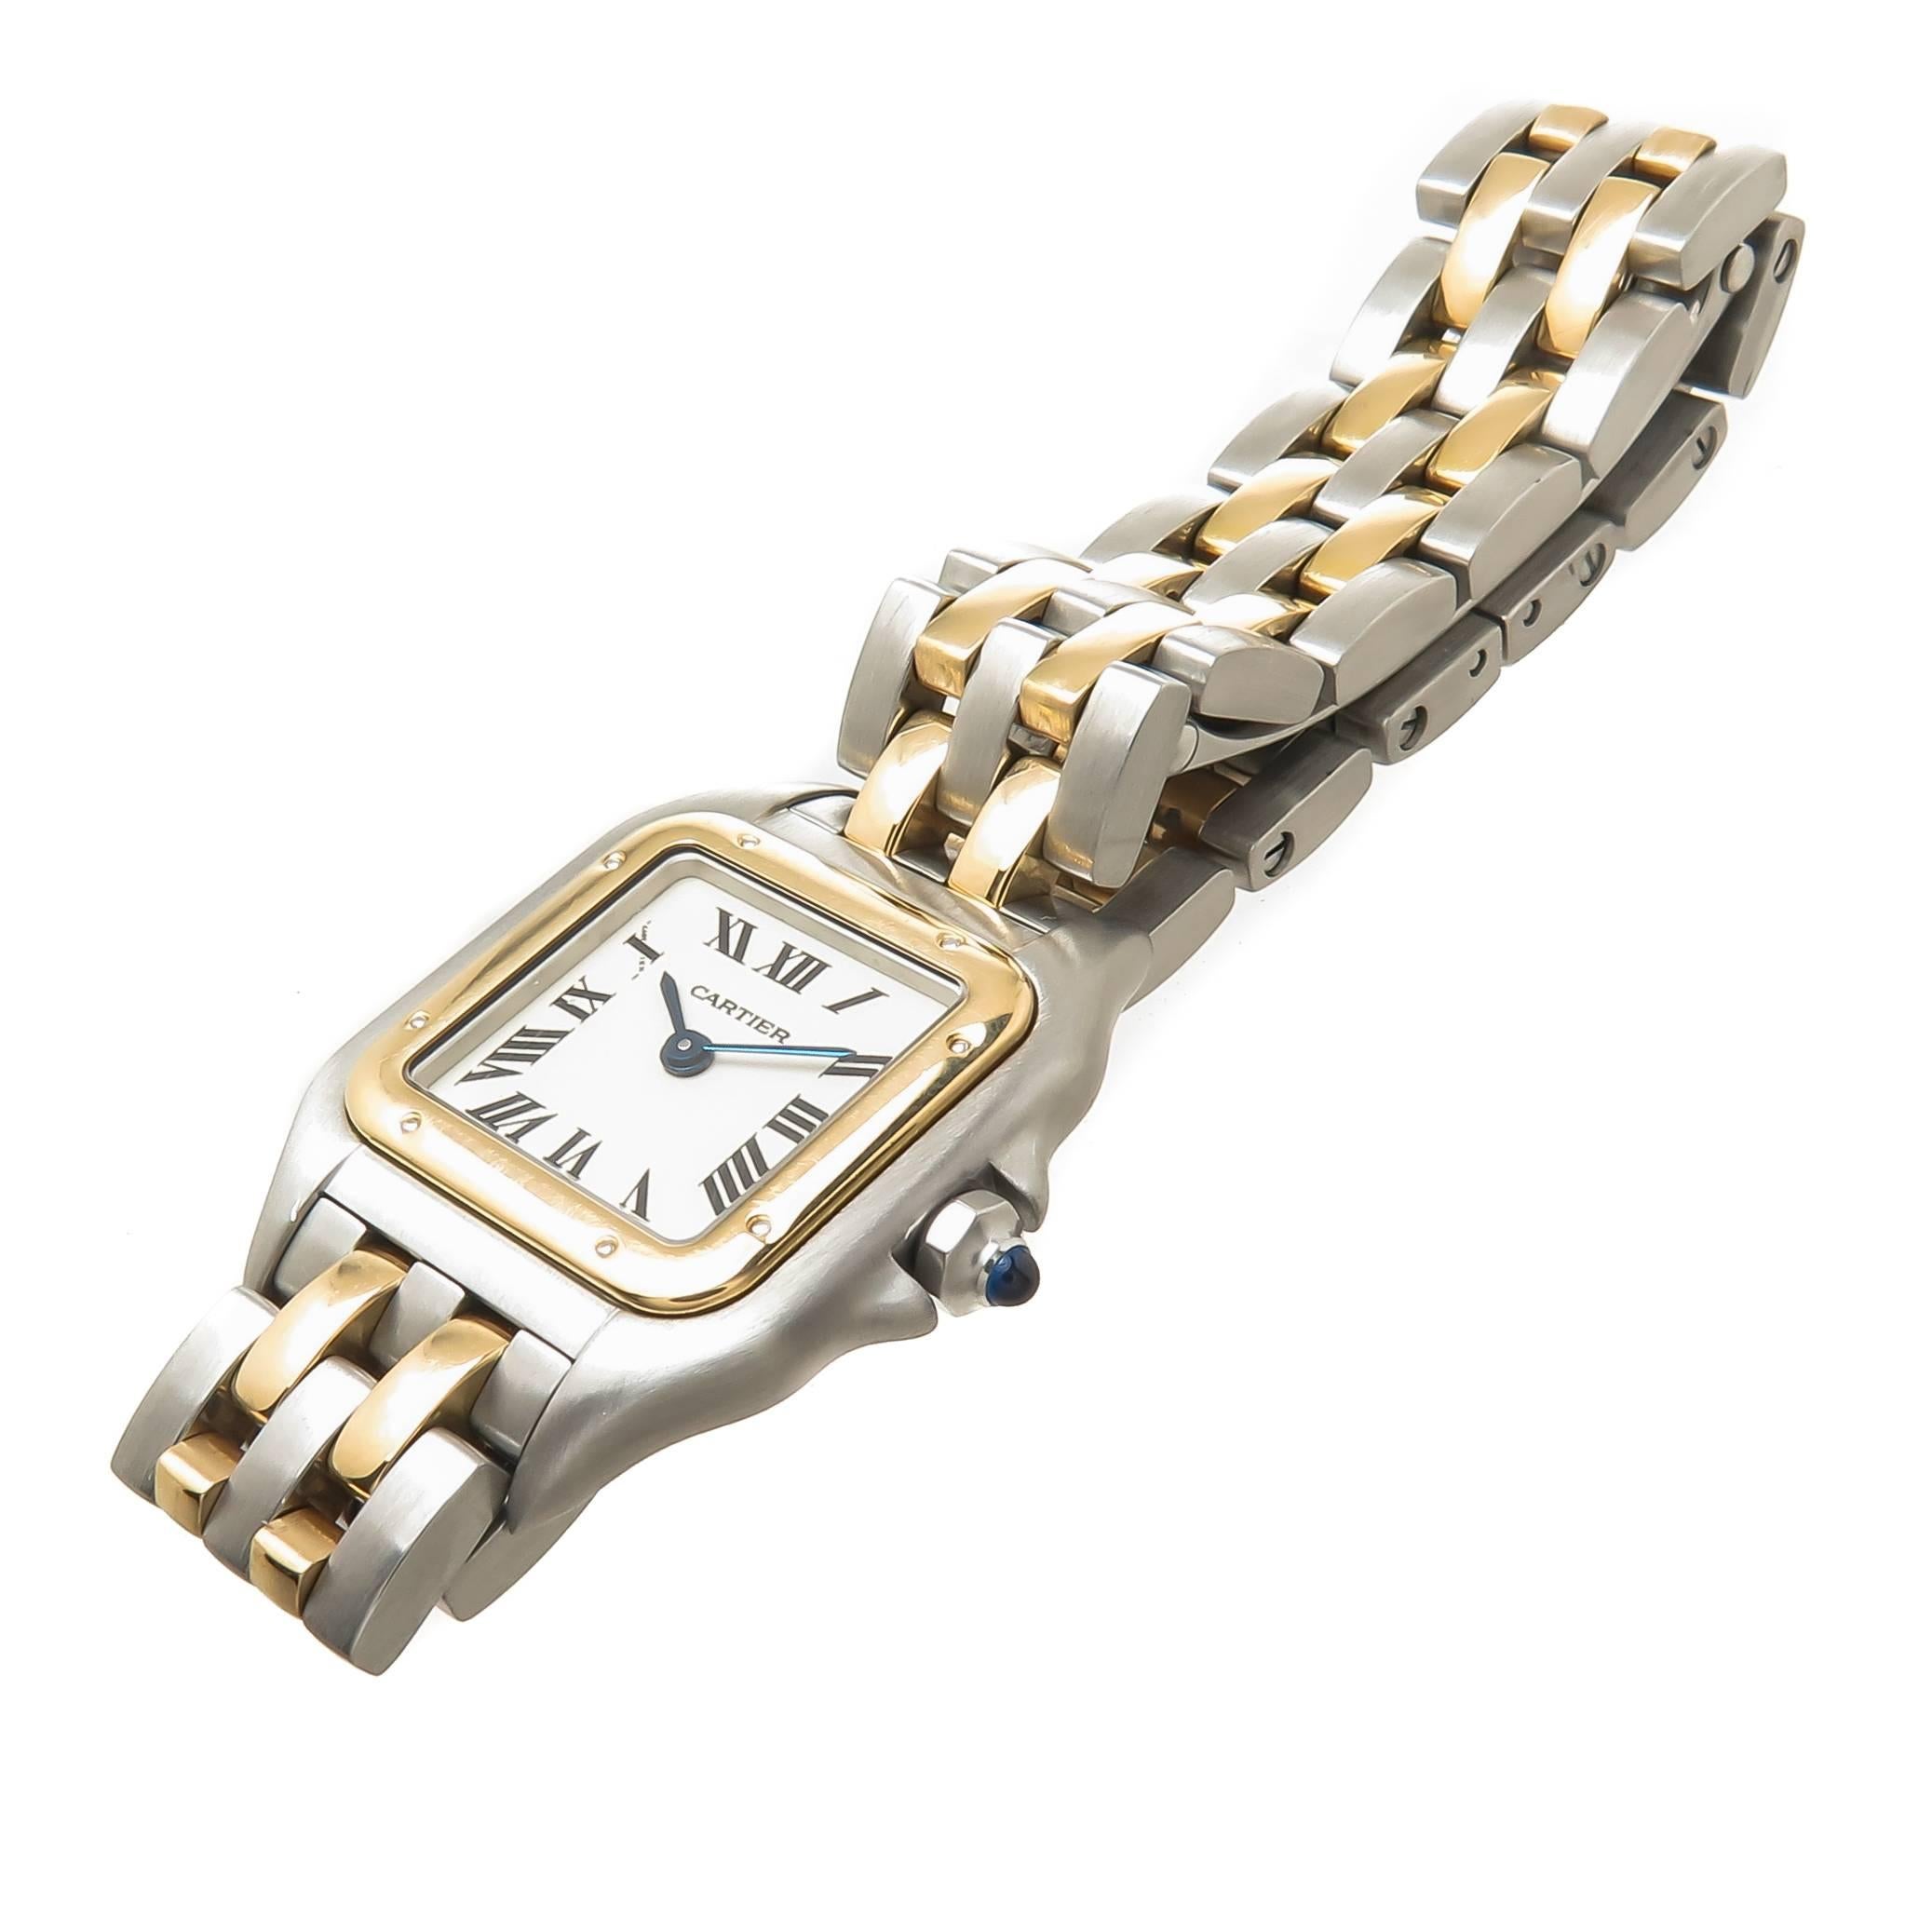 Circa 1990s Cartier Ladies Panther Collection Ladies Watch, 30 X 23 MM Stainless Steel Water resistant Case with 18K yellow Gold Bezel, Quartz Movement, White Dial with Black Roman Numerals and a sapphire Crown. 1/2 inch wide " 2 stripe "